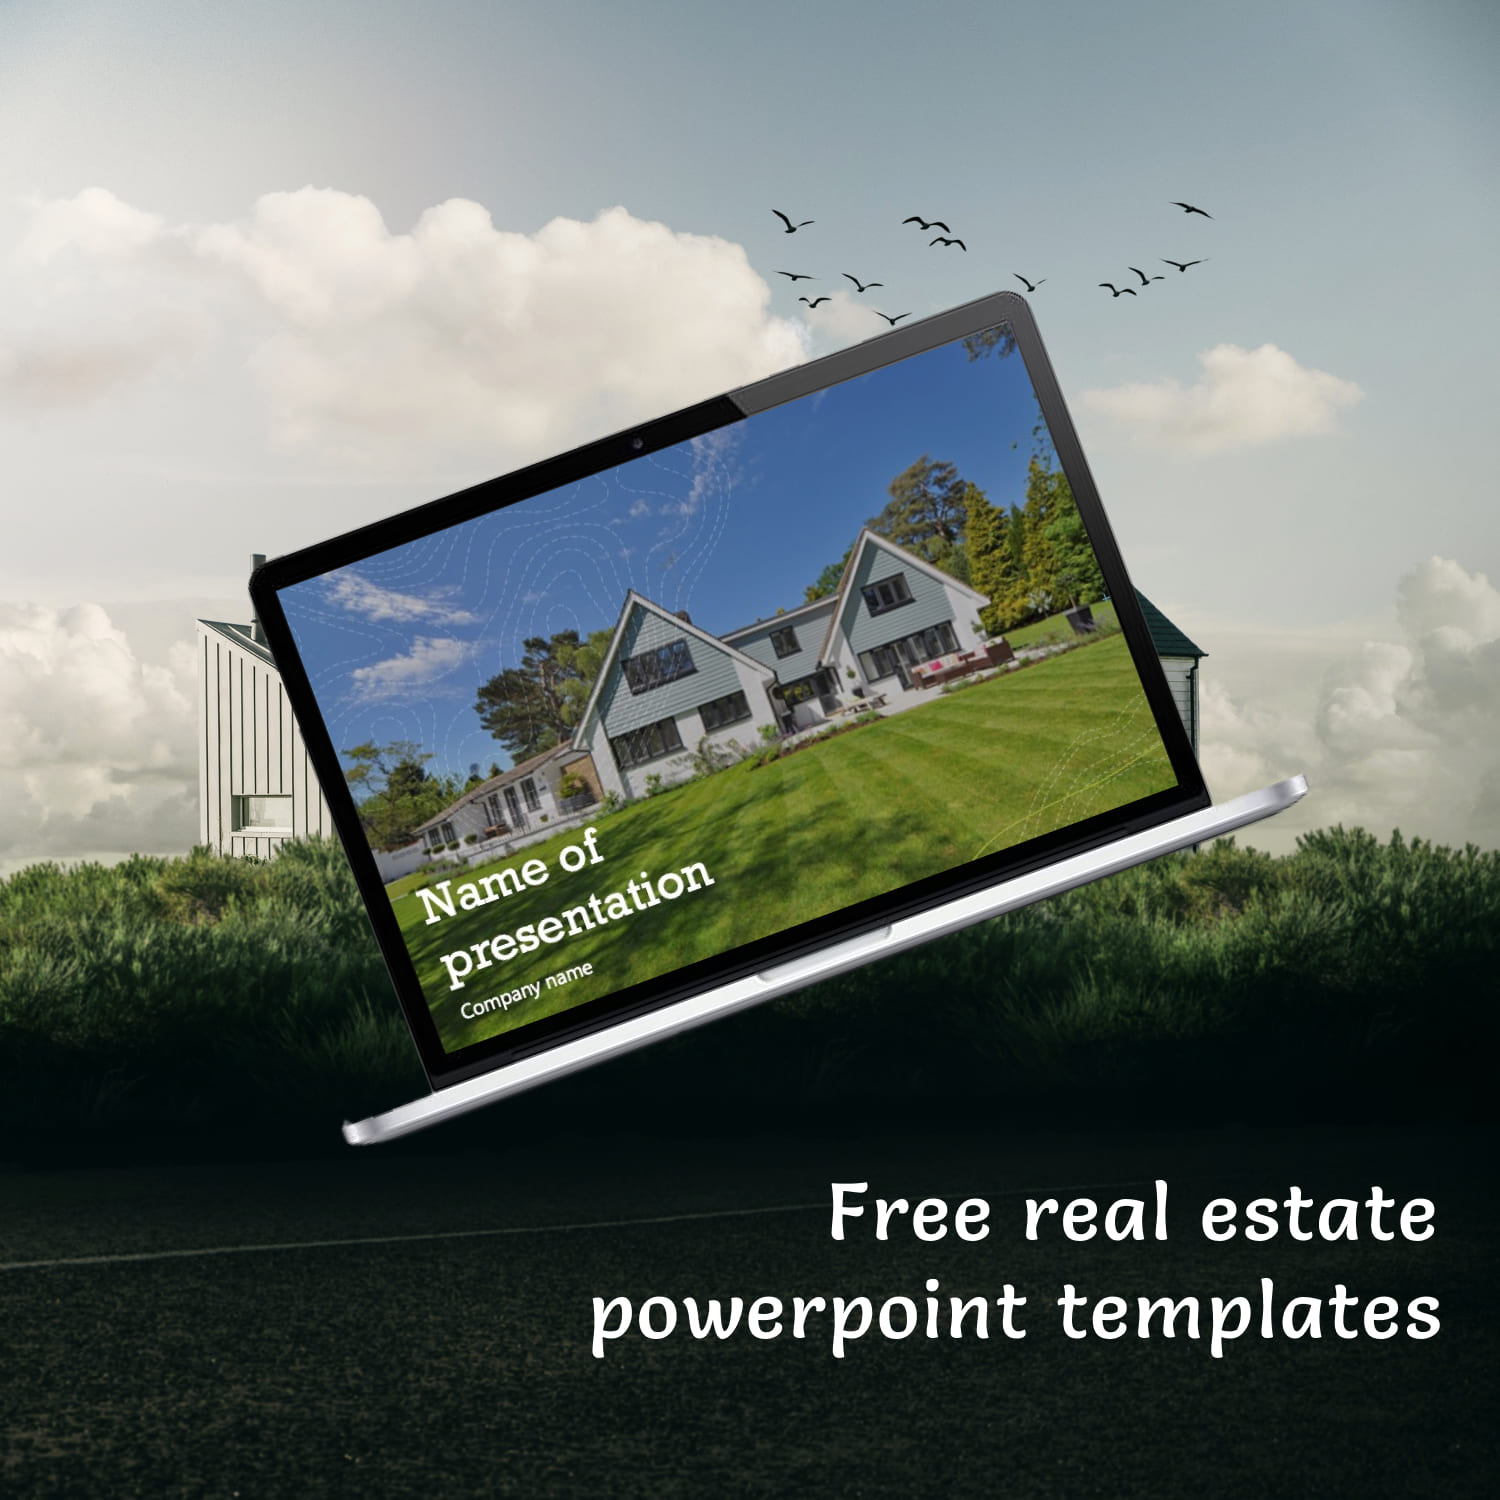 1500 1 Free Real Estate Powerpoint Templates.